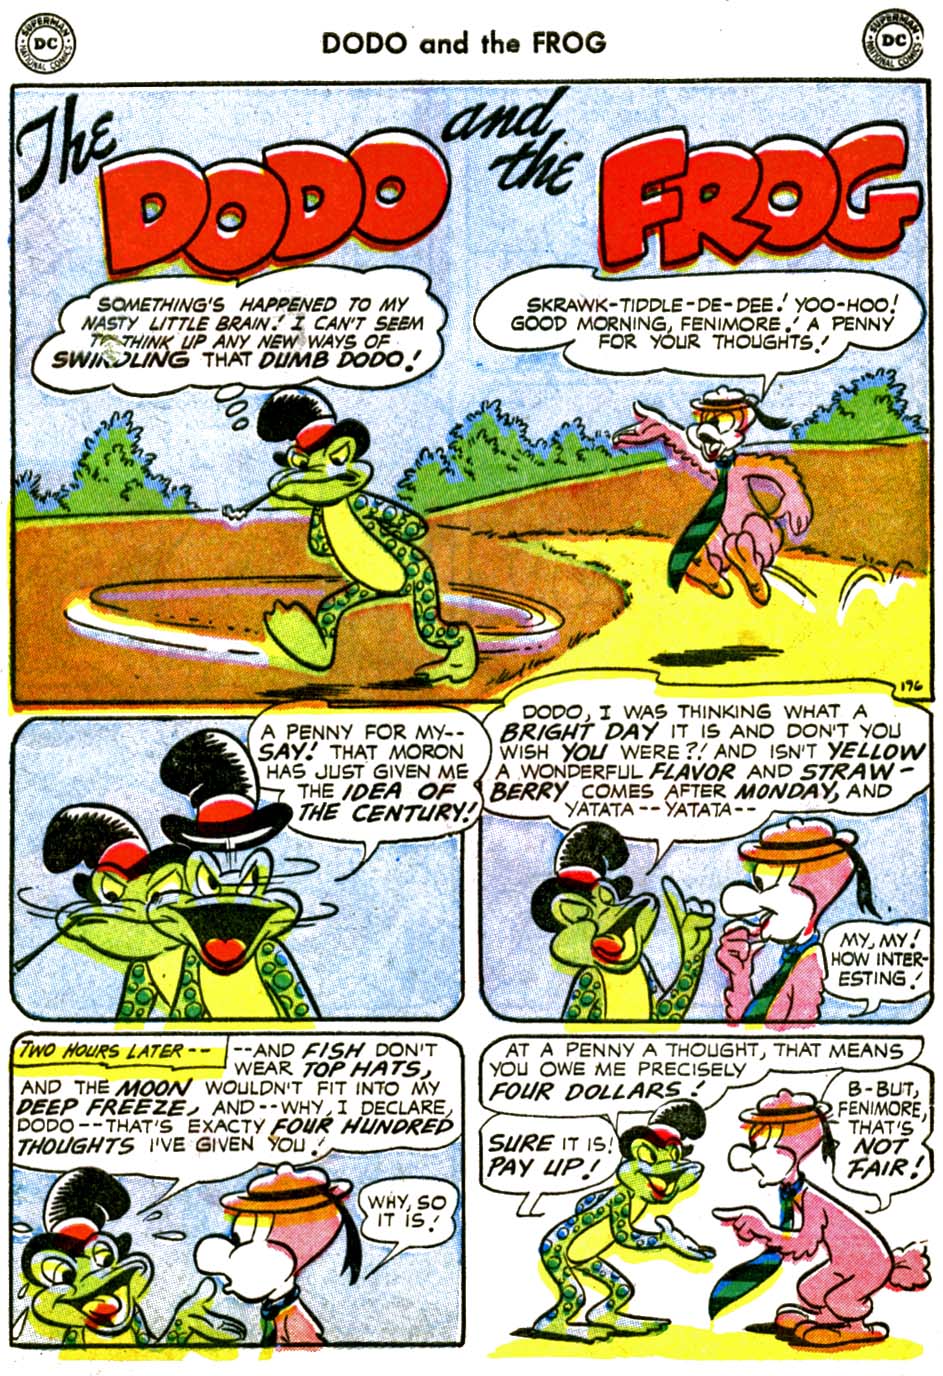 Read online Dodo and The Frog comic -  Issue #82 - 9